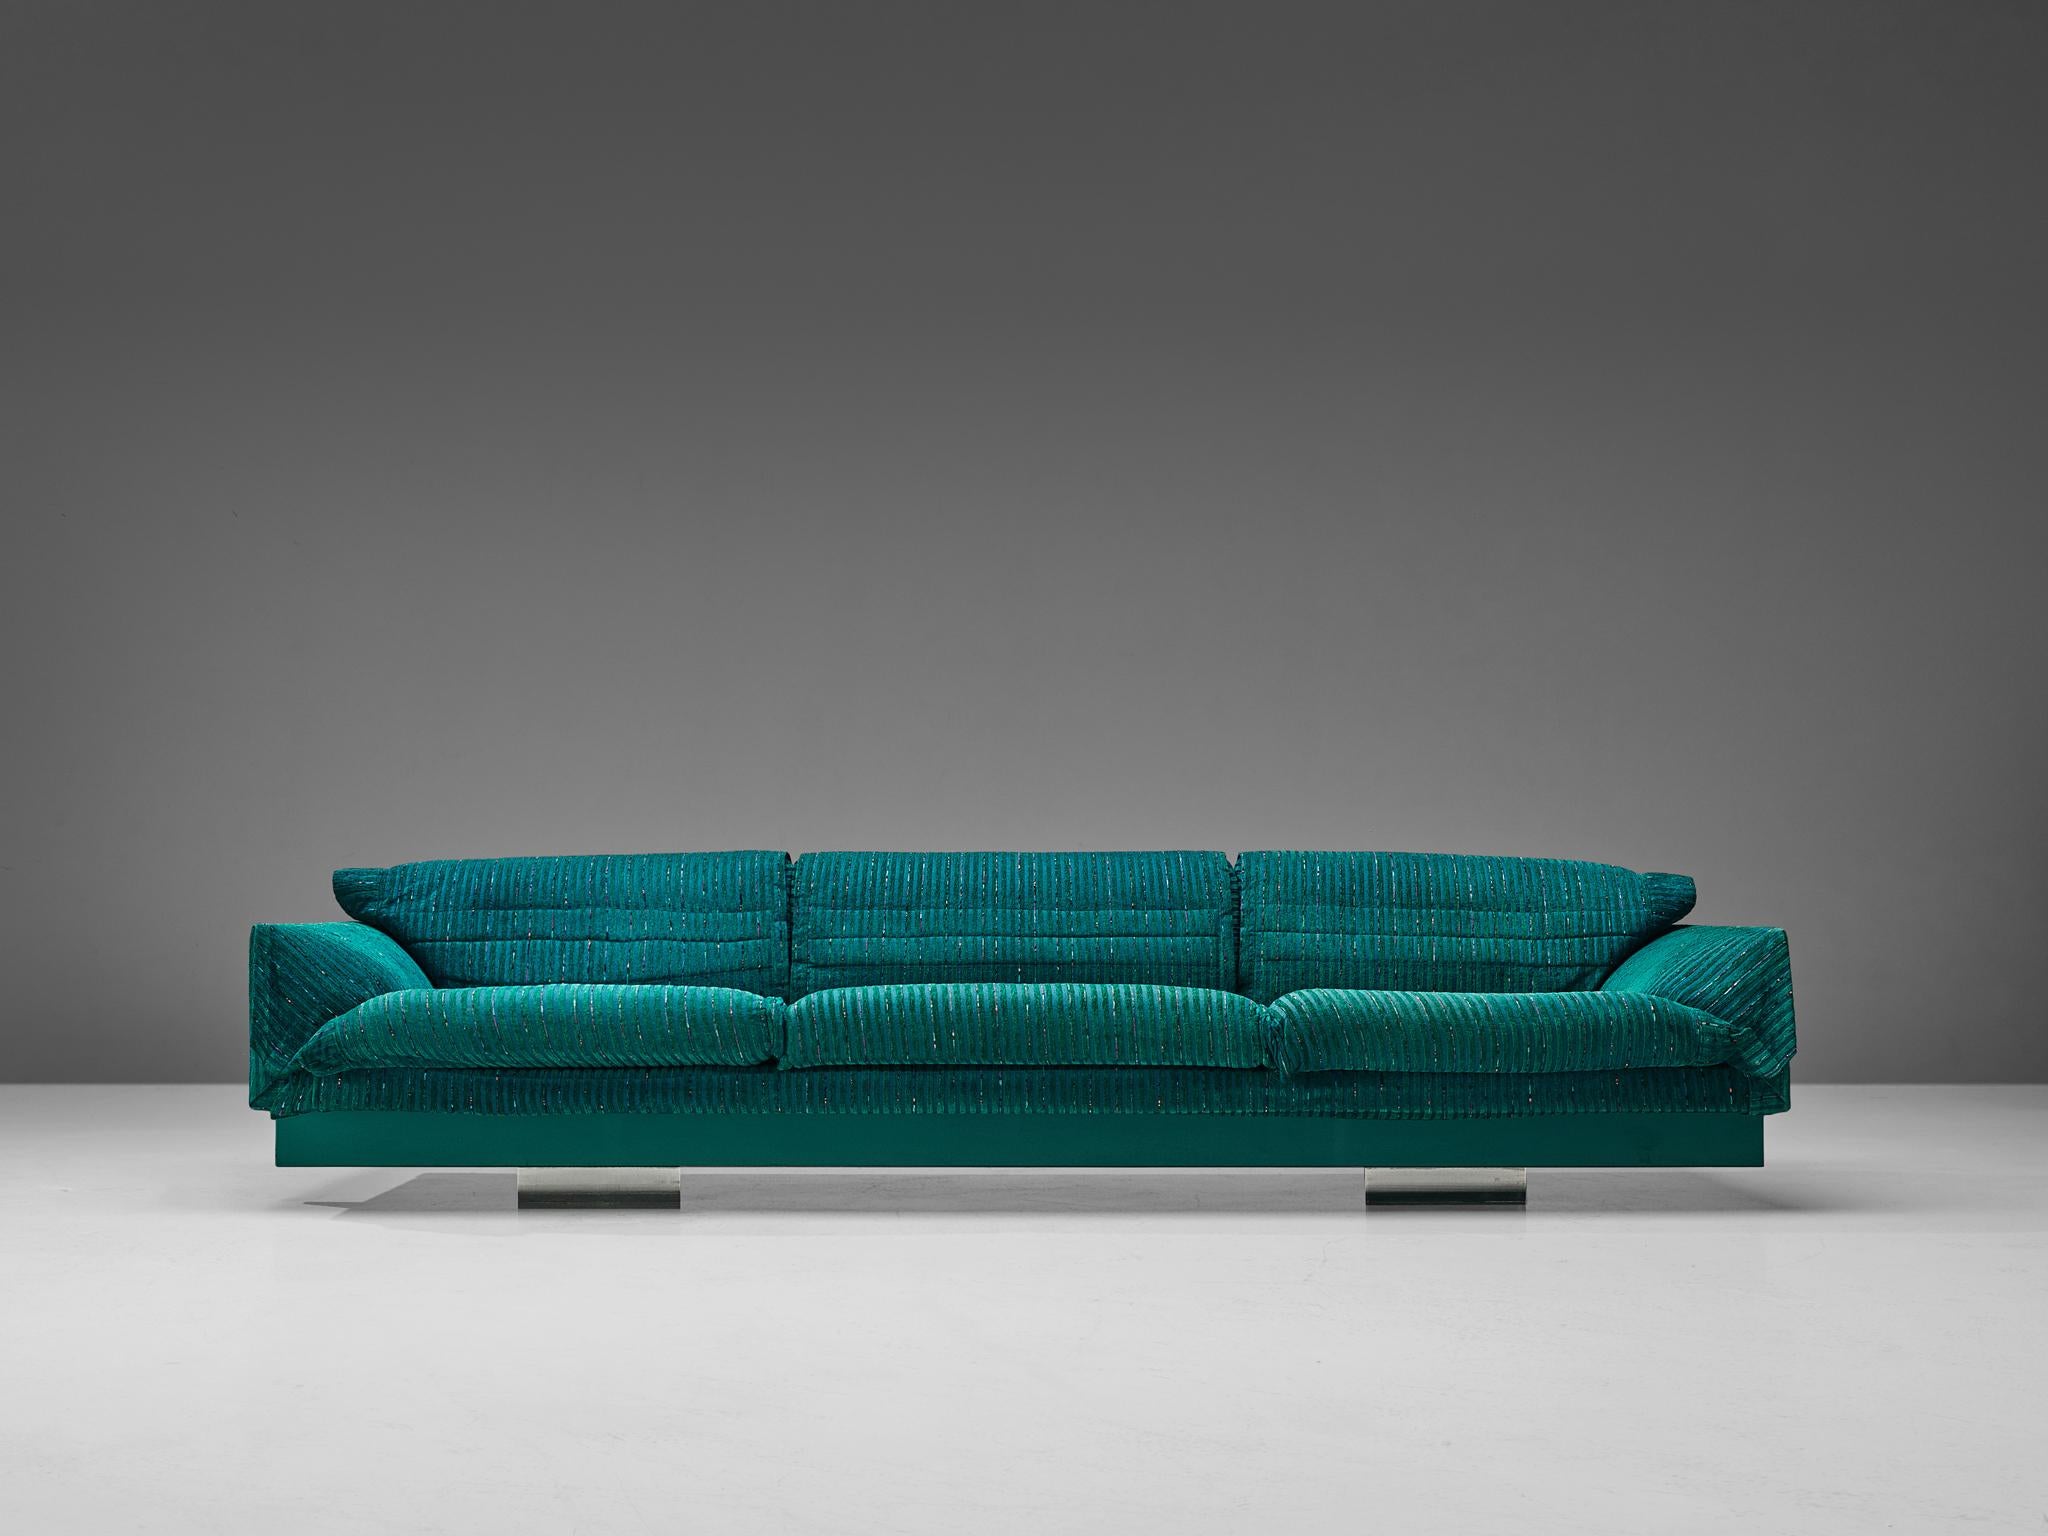 Saporiti, sofa, fabric, metal, Italy, 1950s

Large sofa manufactured by Saporiti. This sofa is designed to be comfortable, soft and inviting. It has three seats with round sloping armrest, creating a relaxed look. Notable is the fabric detailing on